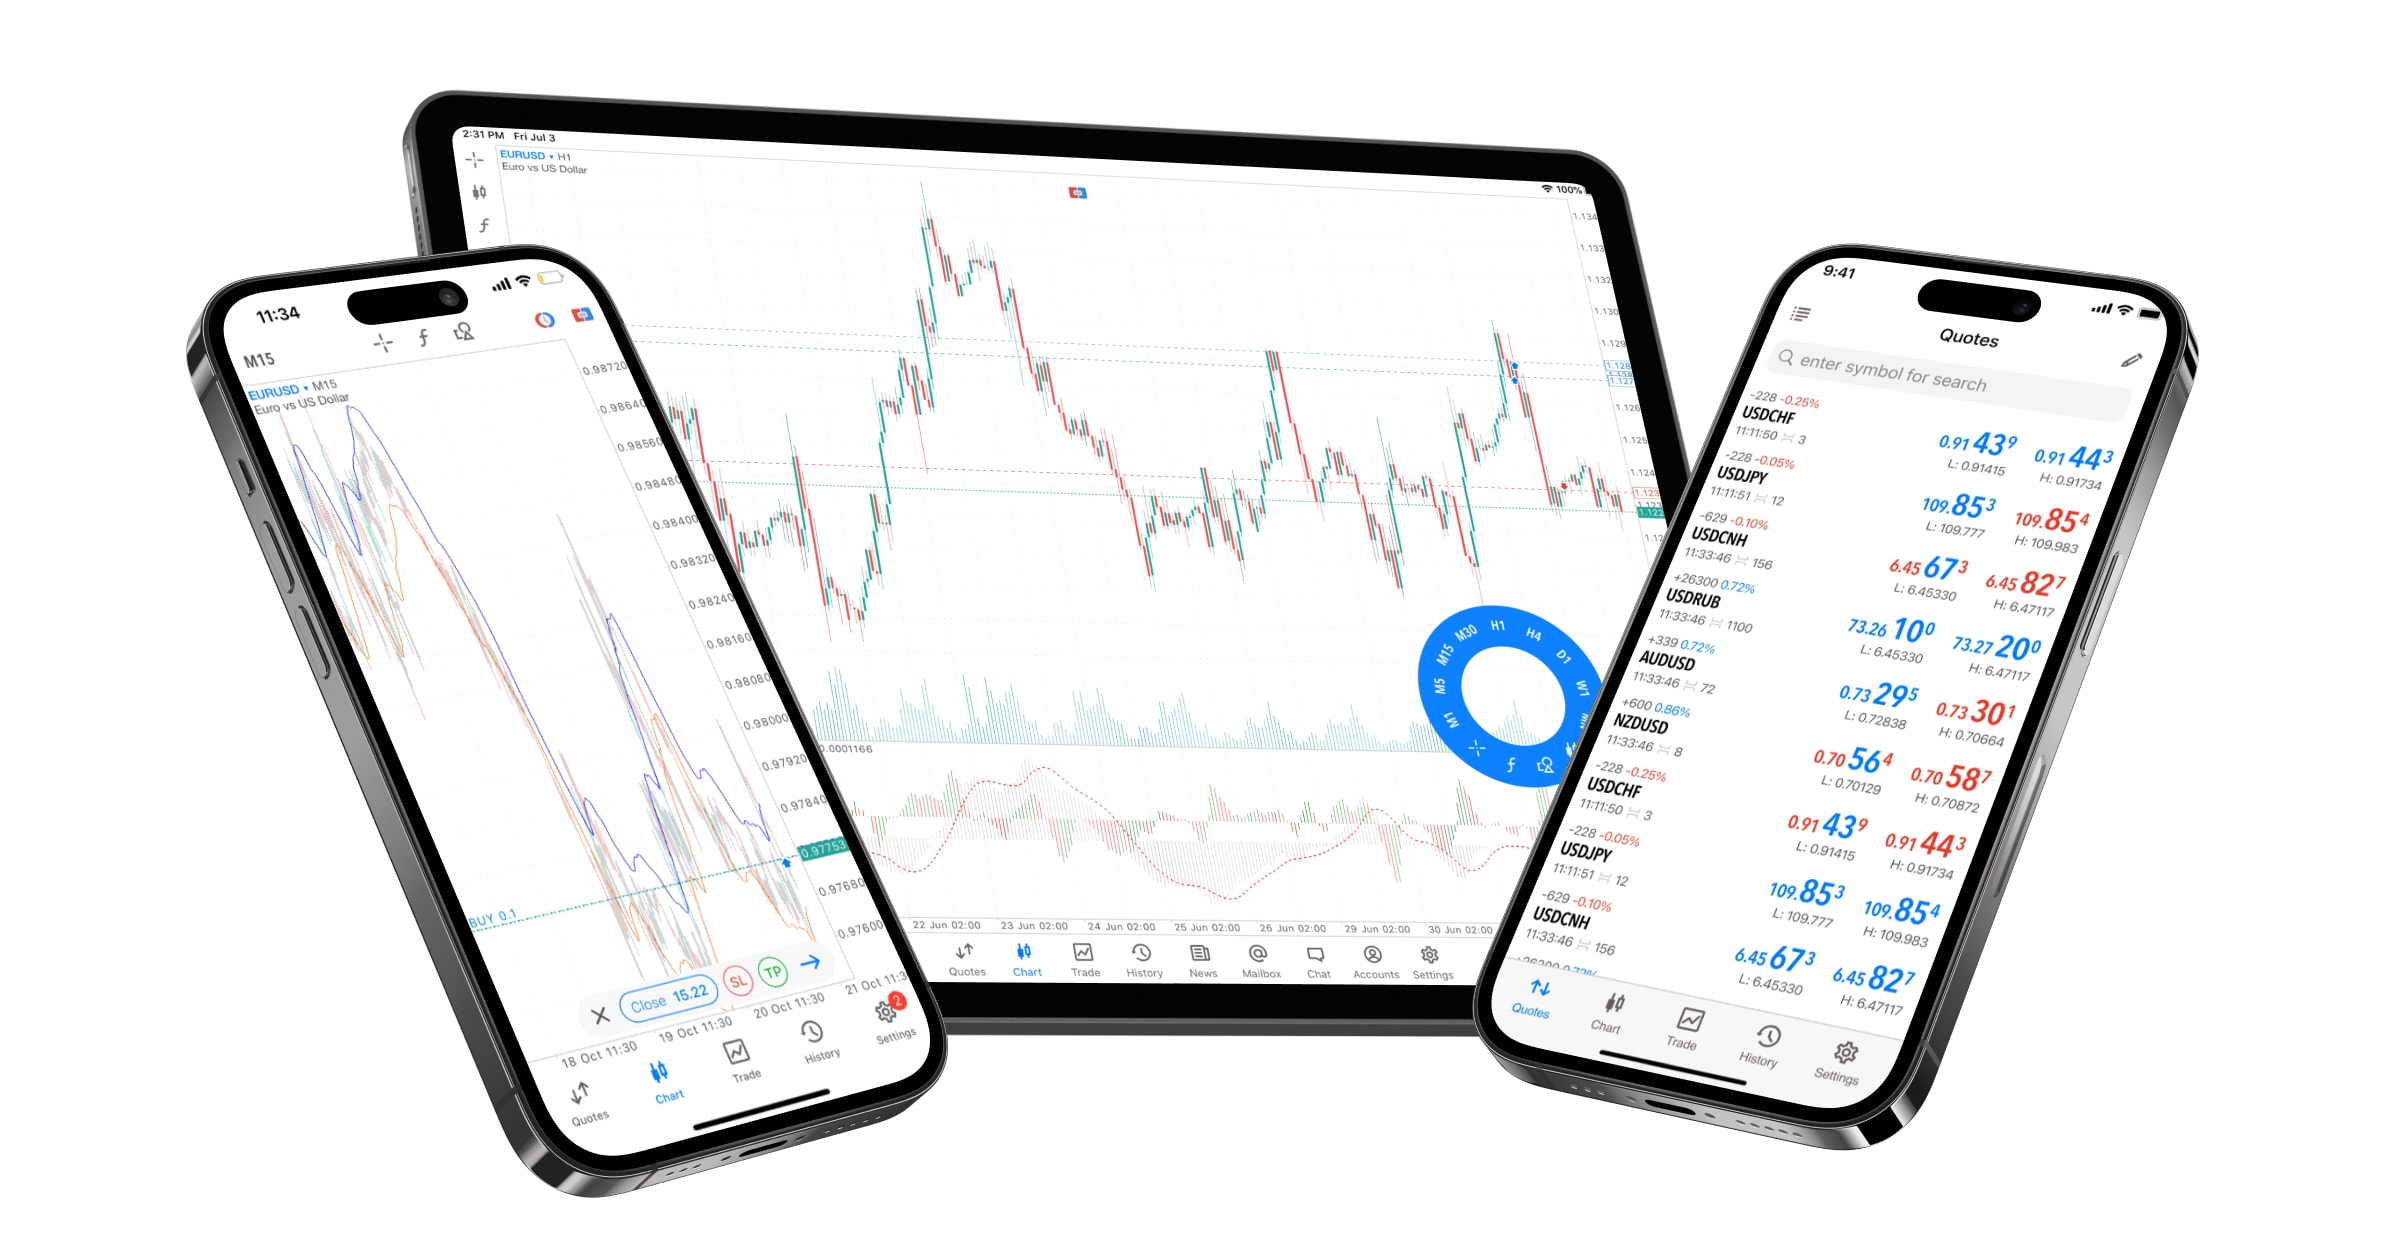 MetaTrader 4 and 5 Applications are back in the Apple App Store